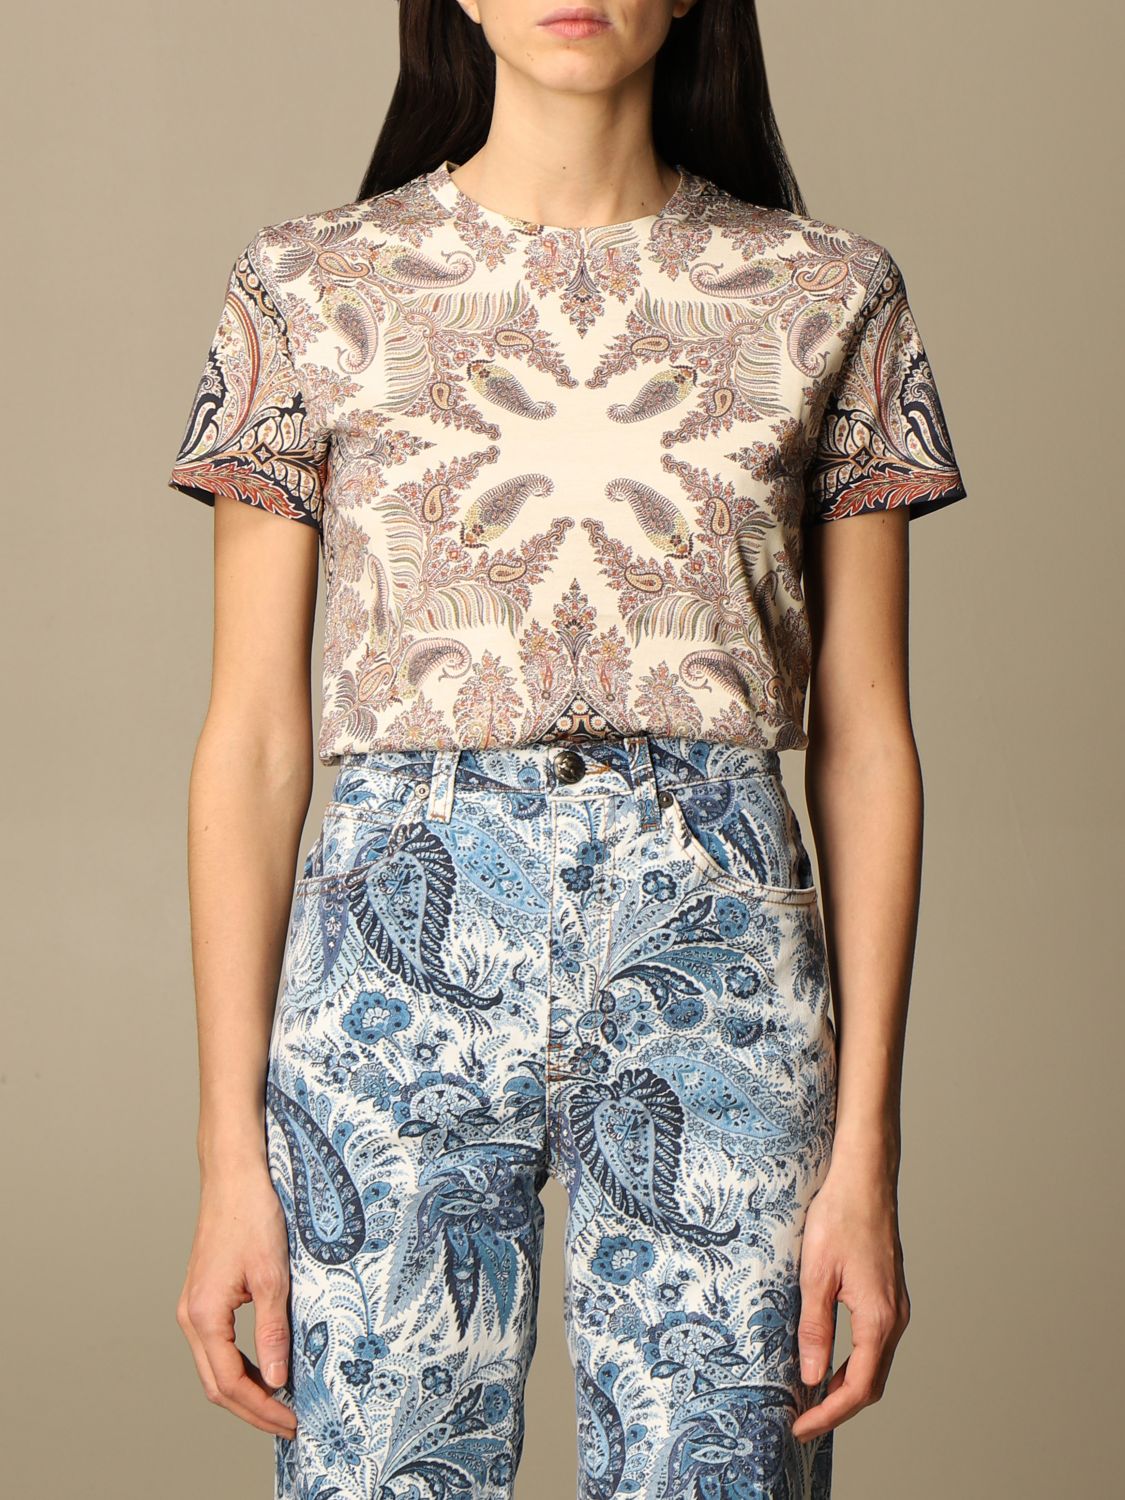 ETRO: t-shirt in paisley patterned cotton - Beige | Etro t-shirt 14514 ...